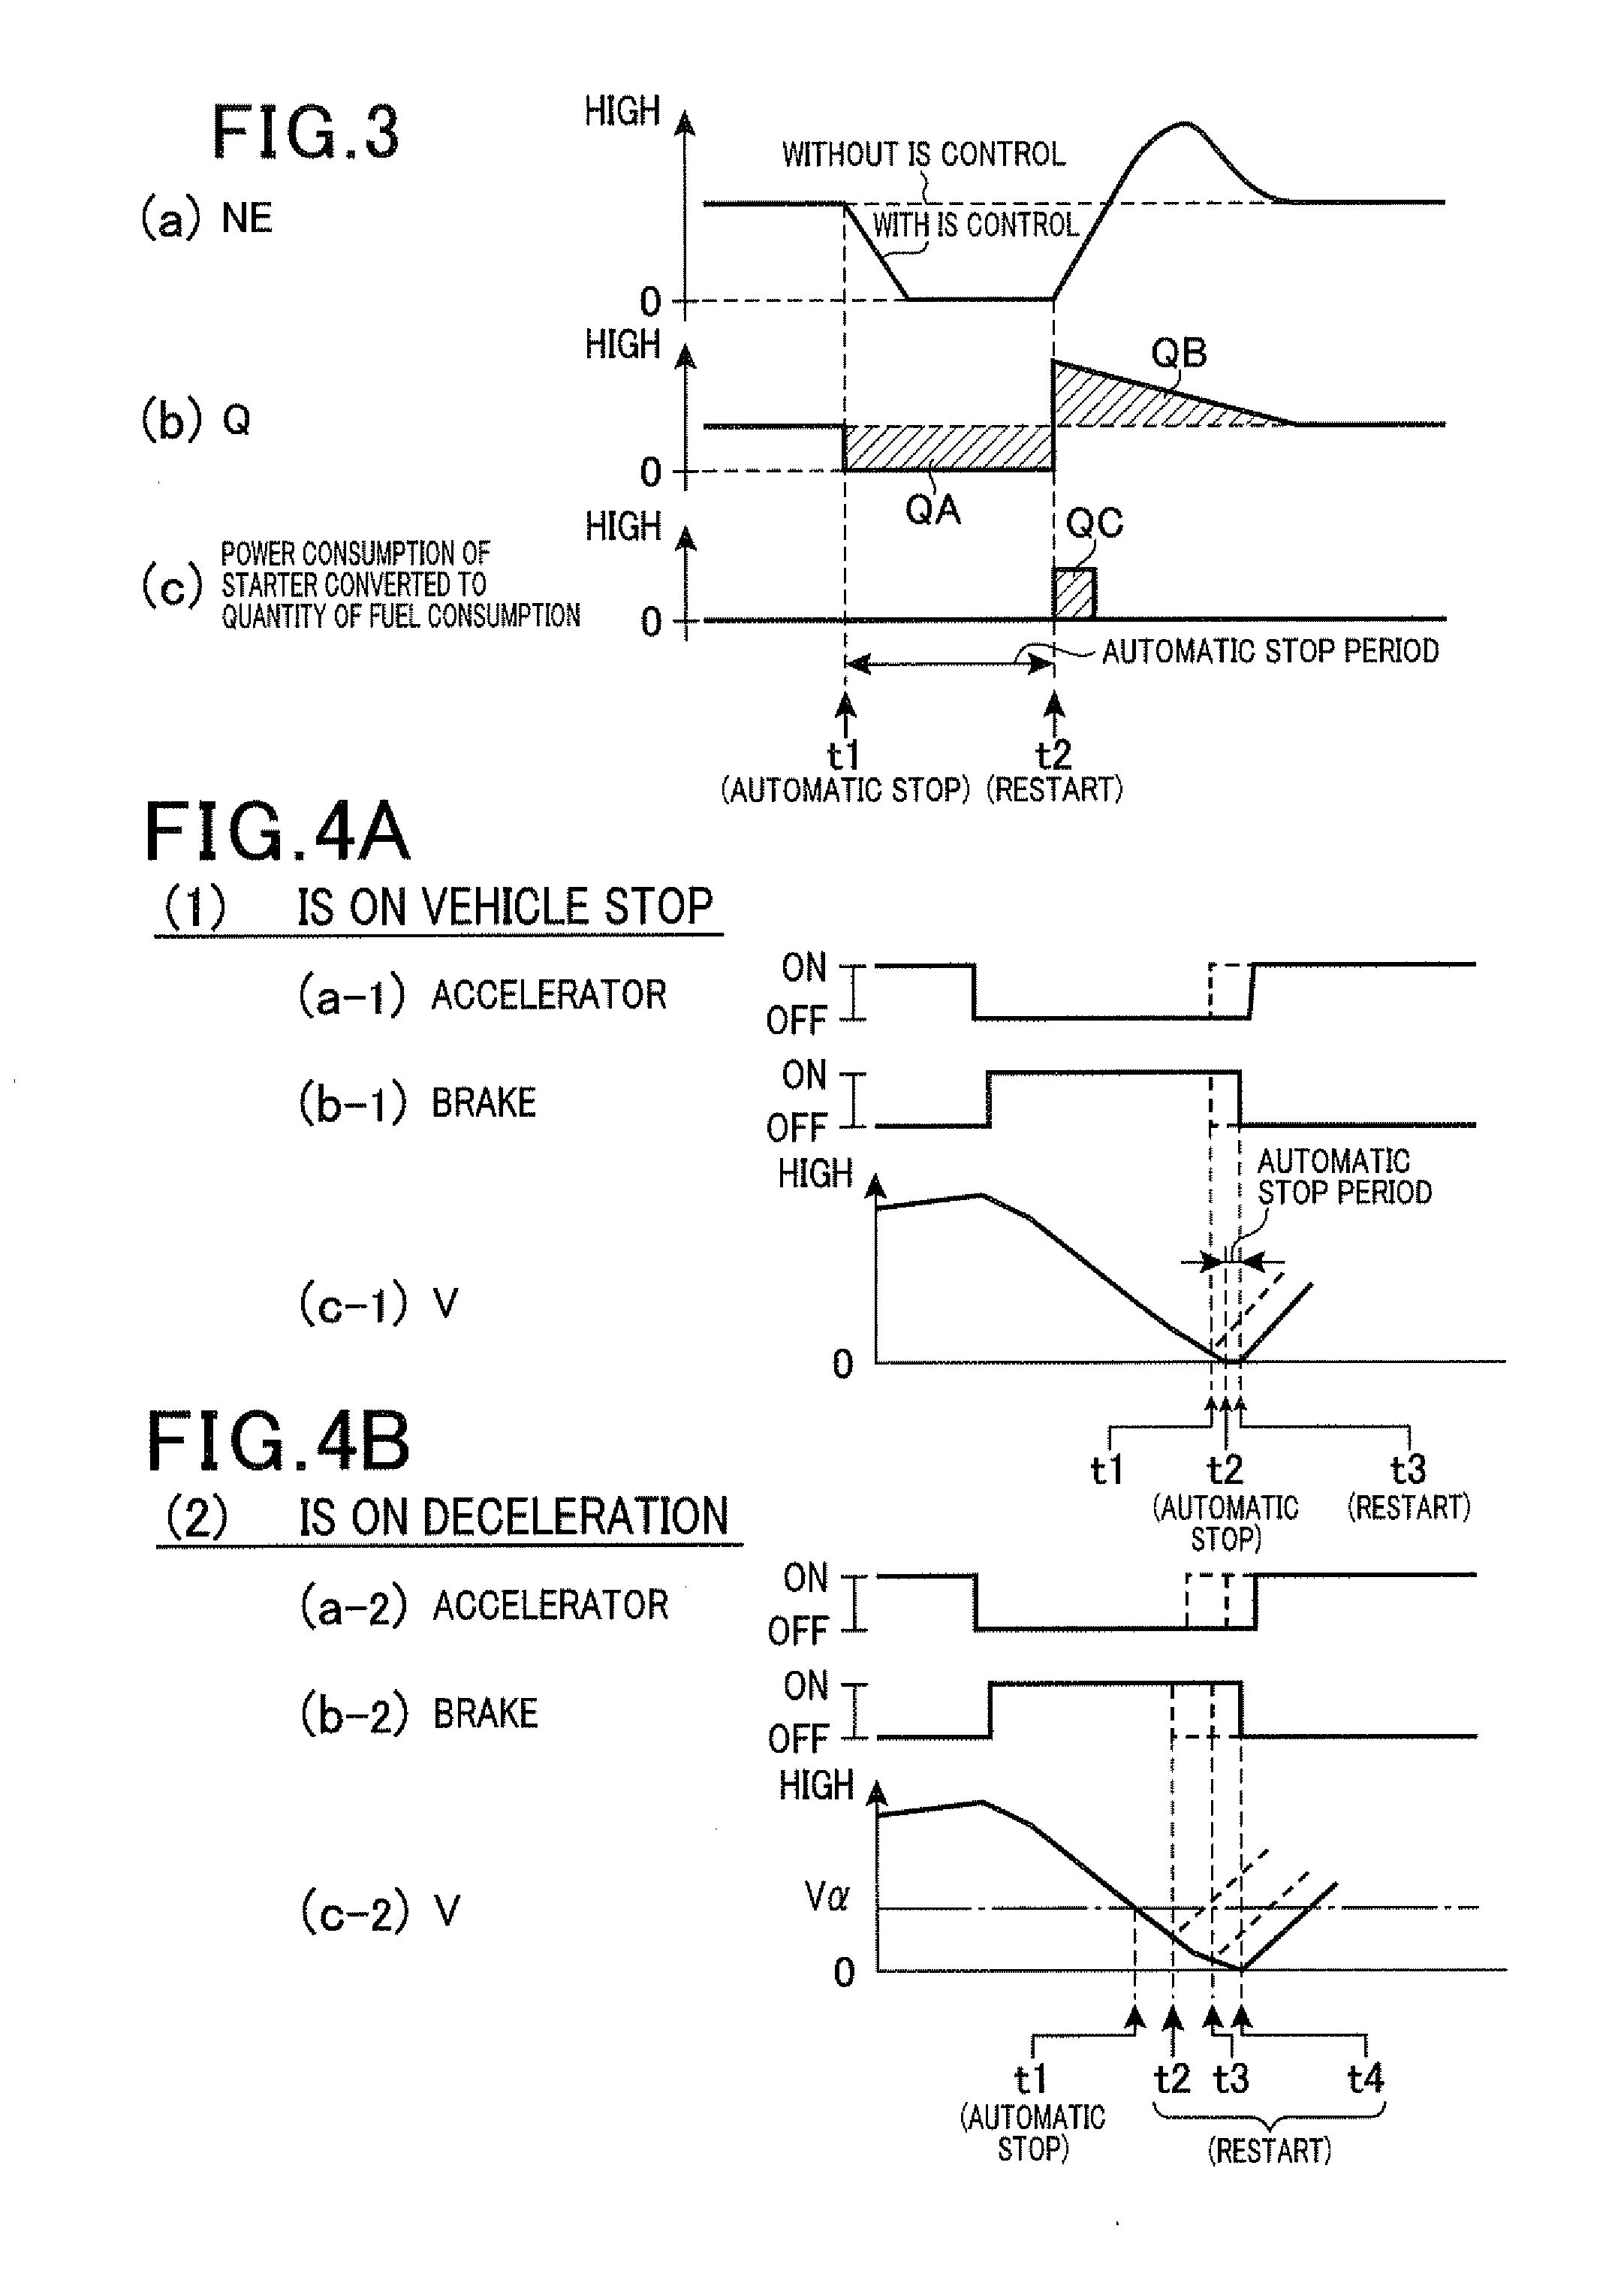 Control apparatus for automatic stop of engine